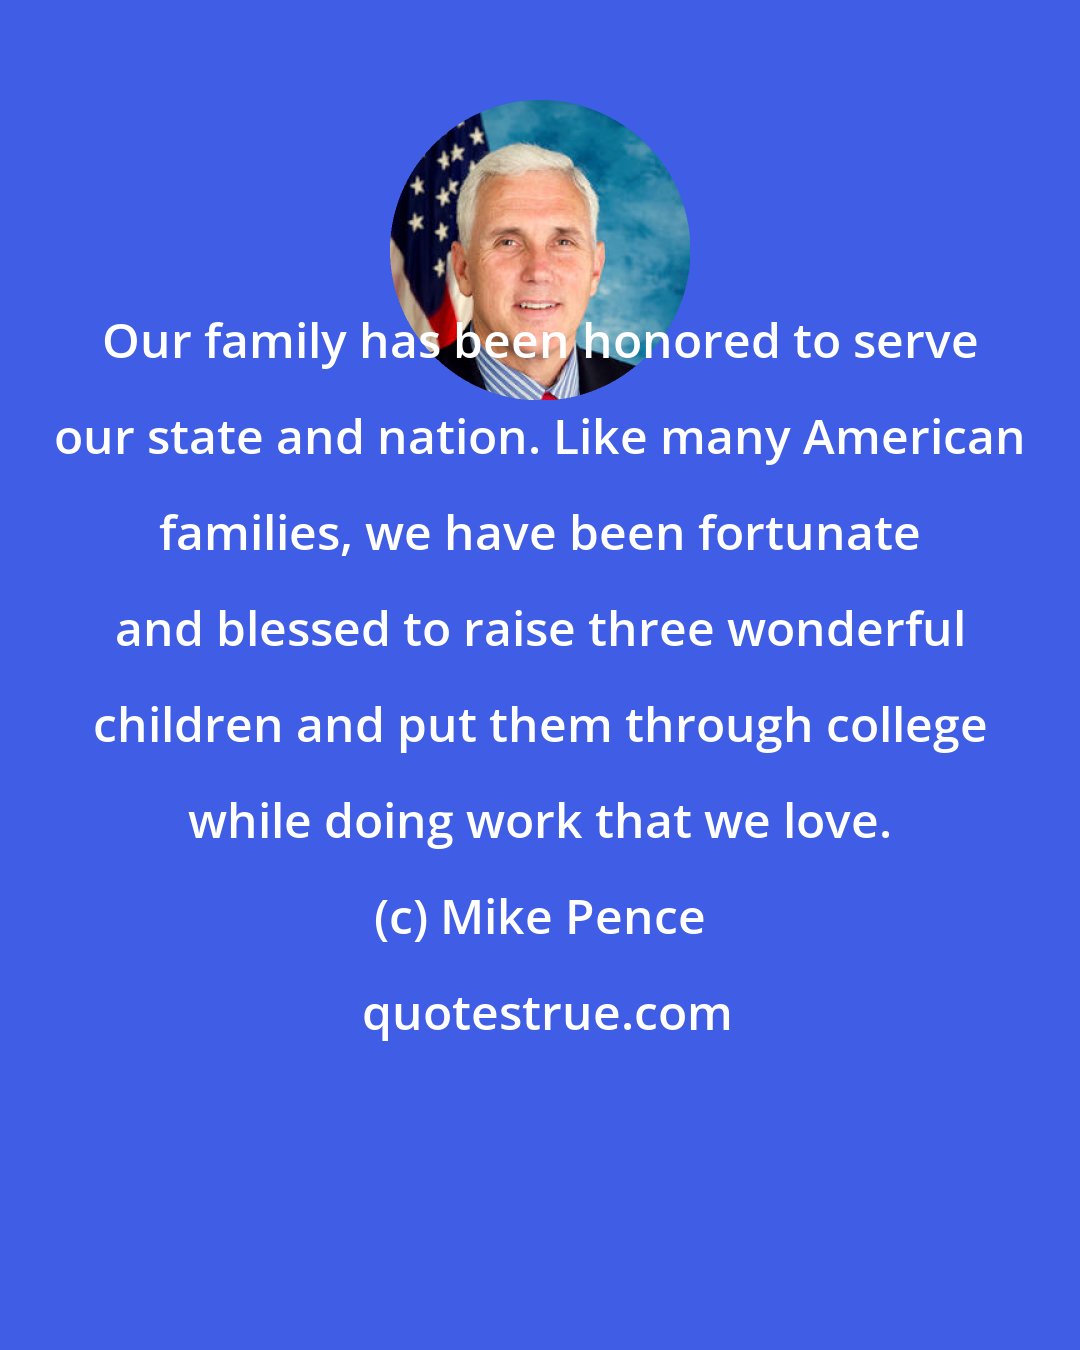 Mike Pence: Our family has been honored to serve our state and nation. Like many American families, we have been fortunate and blessed to raise three wonderful children and put them through college while doing work that we love.